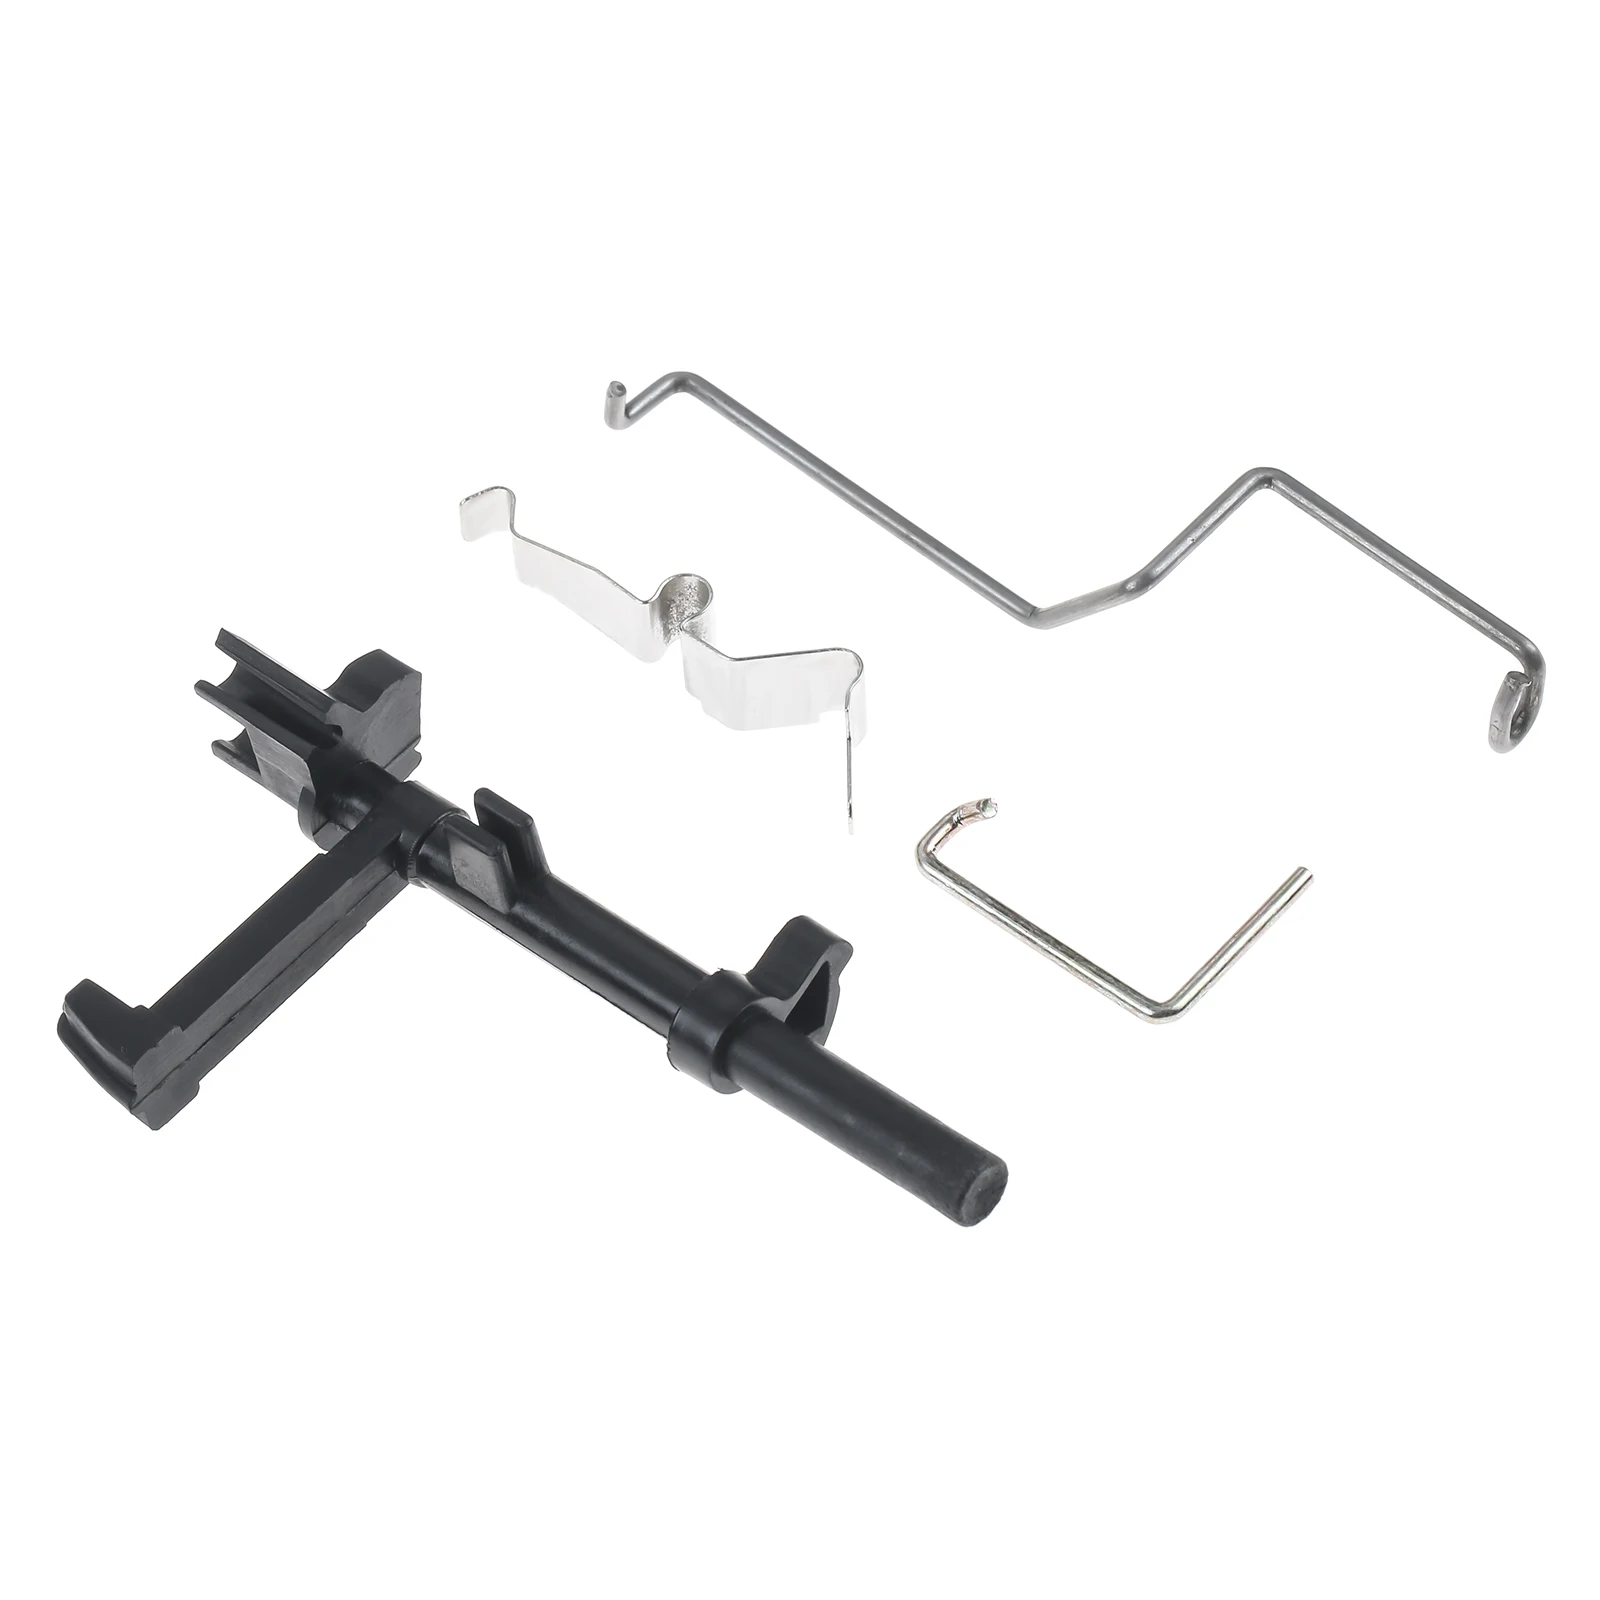 

Switch Shaft Contact Spring Kit Choke Rod Throttle Rod Lever fit for STIHL MS180 MS170 018 017 MS 180 170 Replace 1130 182 0900